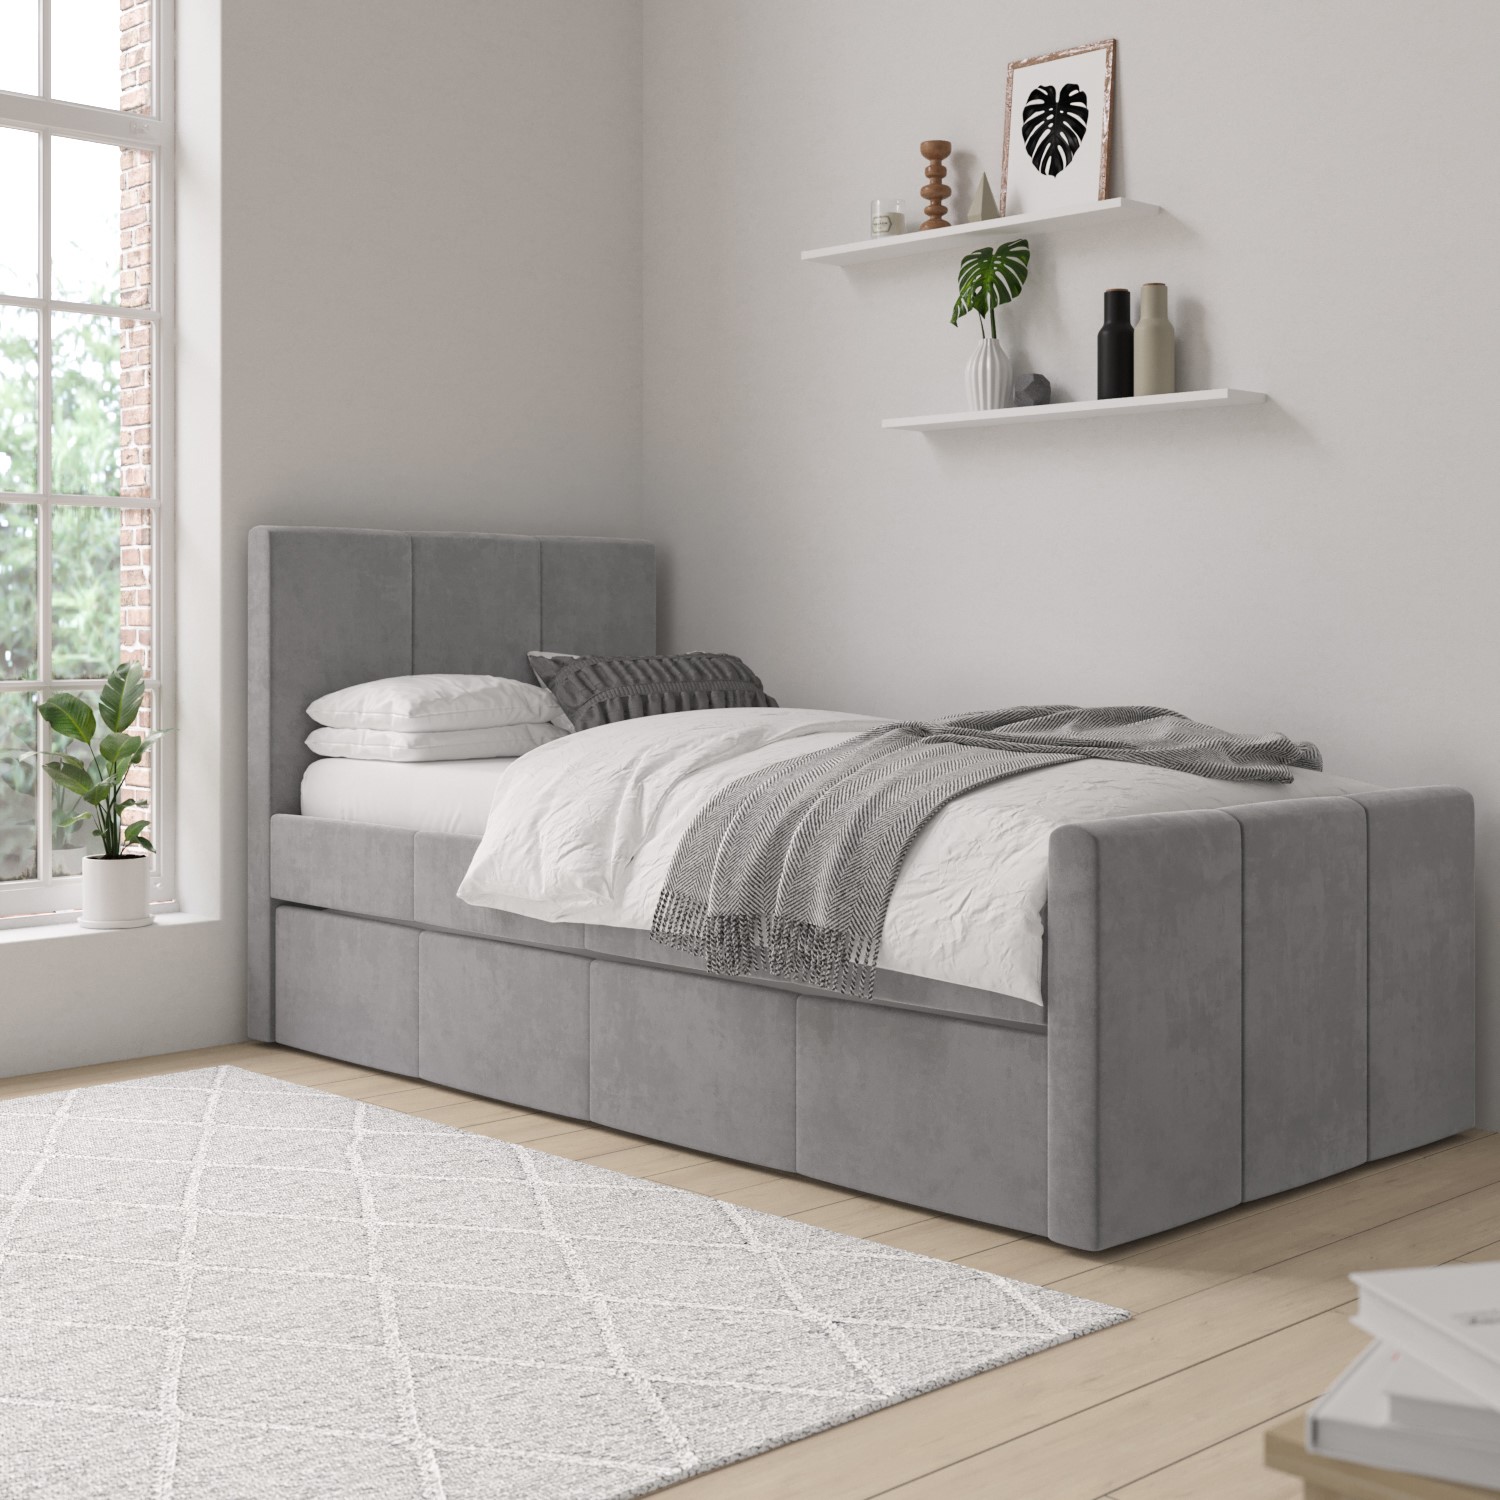 Read more about Single guest bed with trundle in grey velvet layla